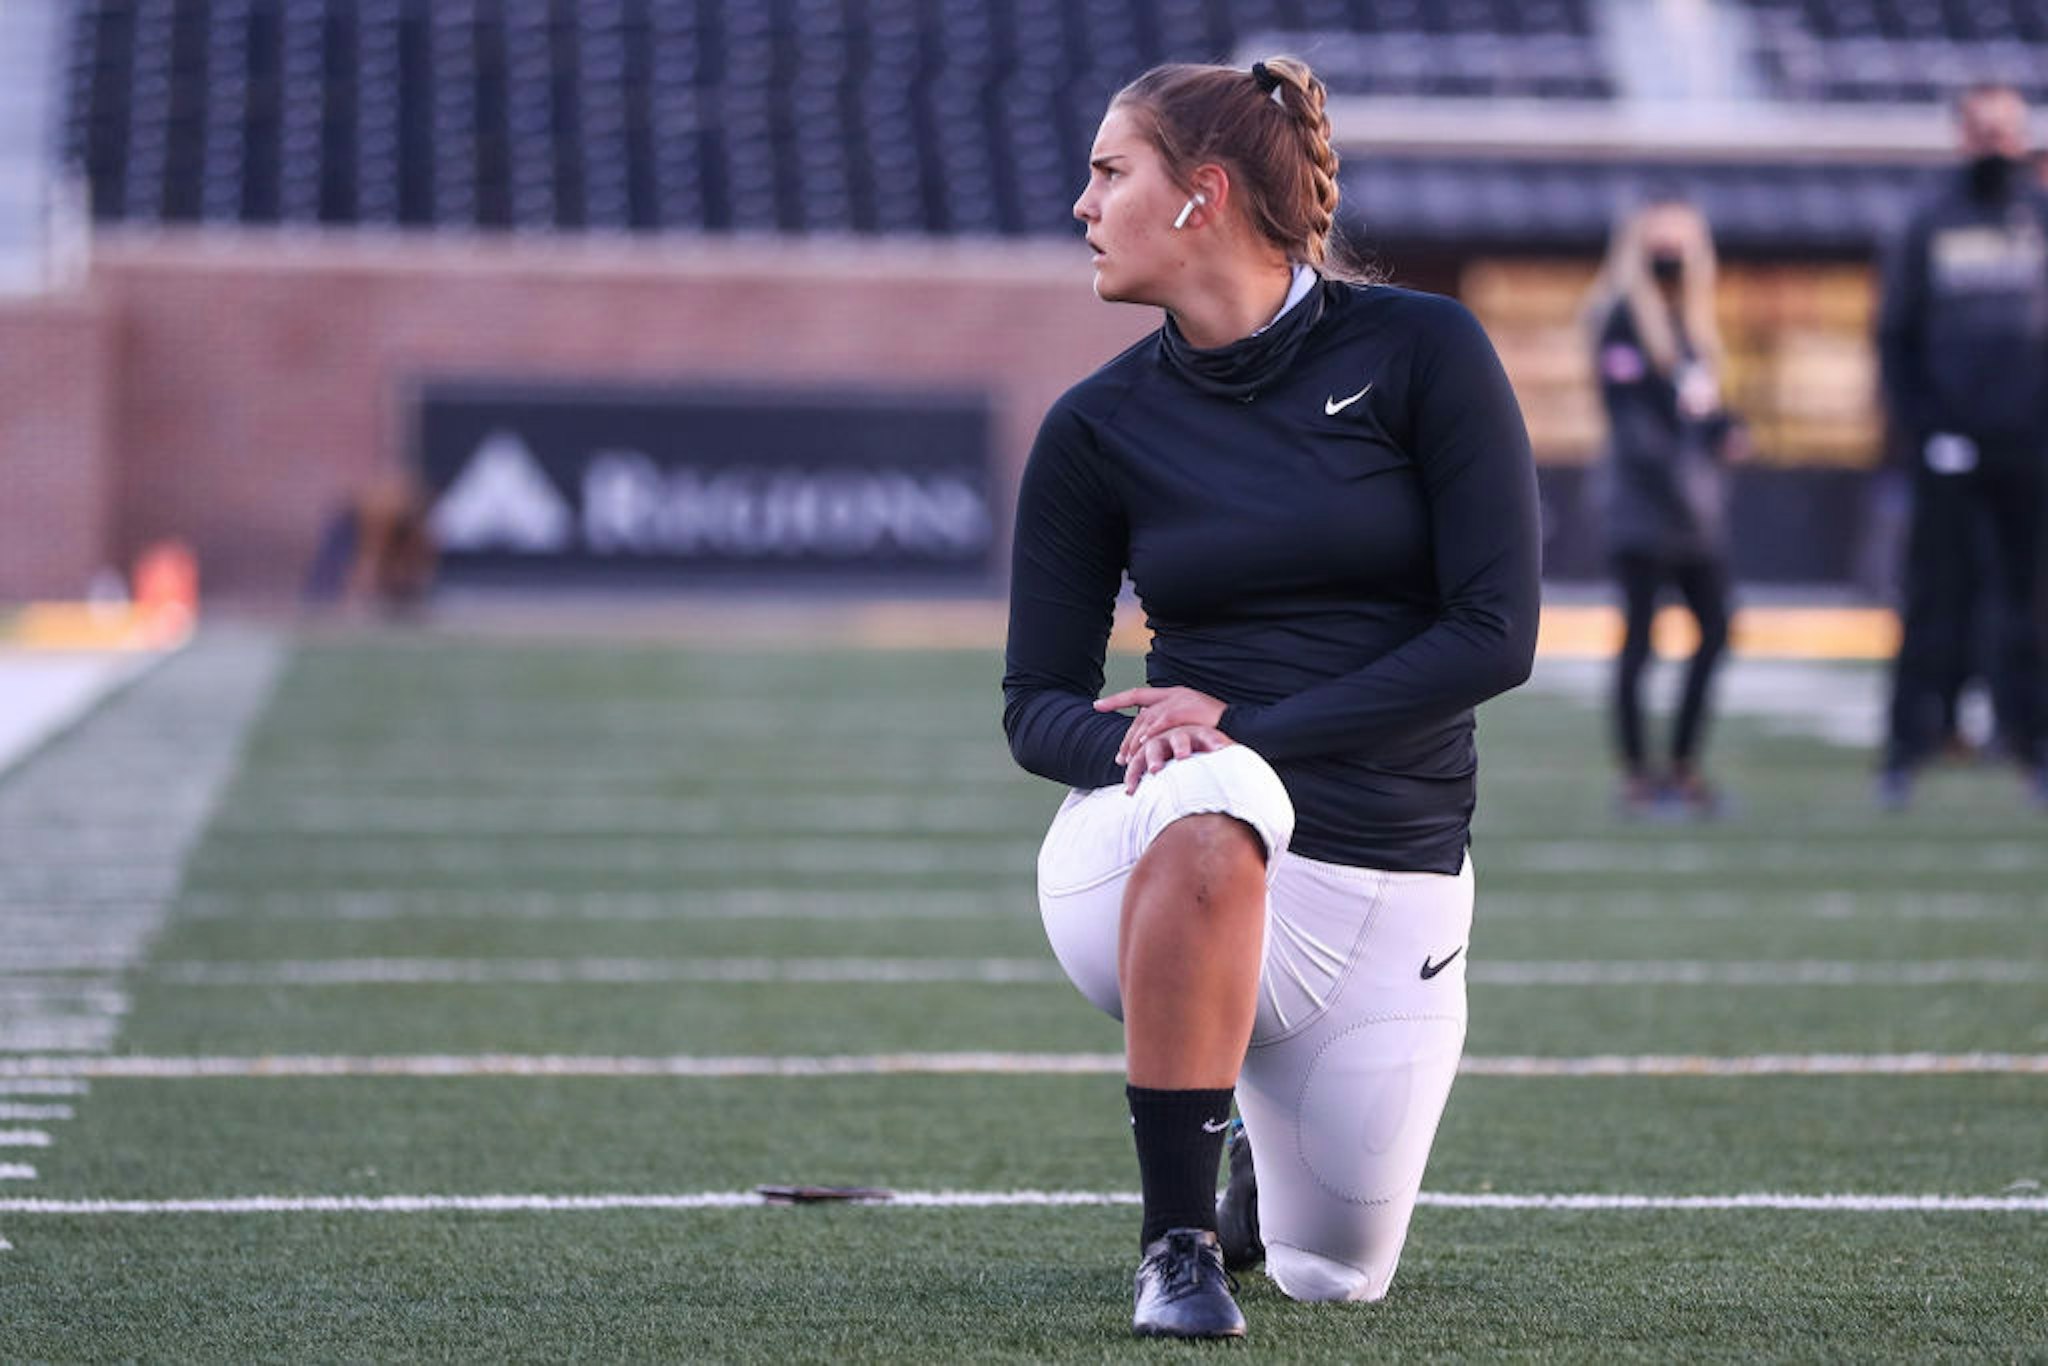 Sarah Fuller #32 of the Vanderbilt Commodores warms up prior to the game against the Missouri Tigers at Farout Field on November 28, 2020 in Columbia, Missouri.